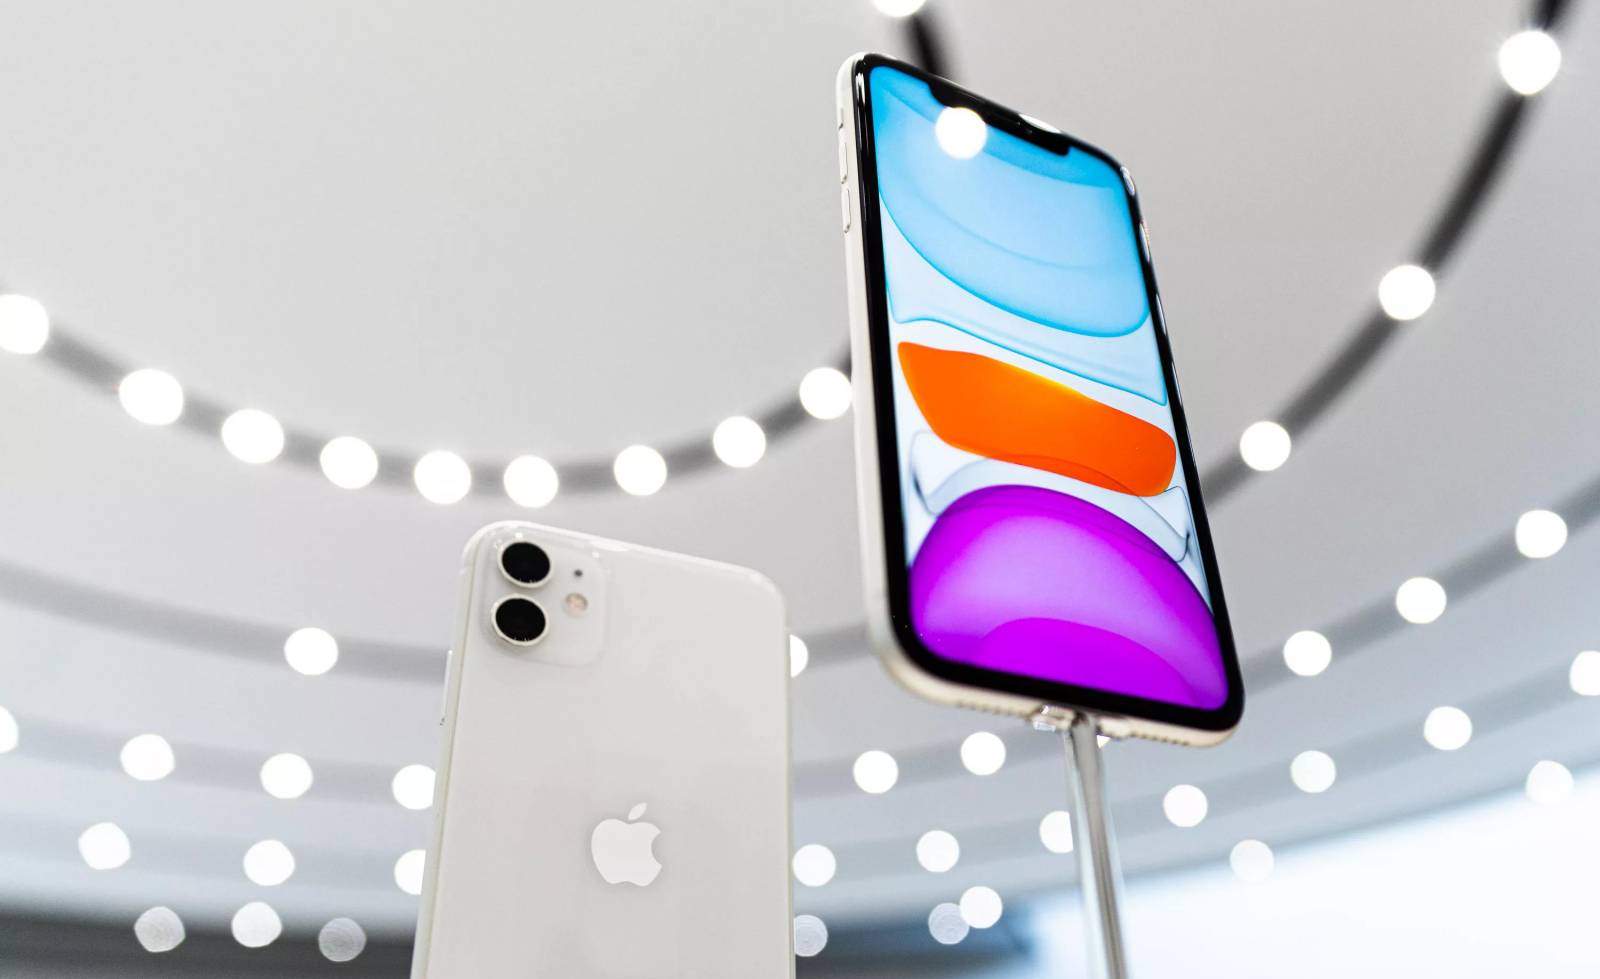 iPhone 11, iPhone 11 Pro will be launched with DISCOUNTS right from the First day